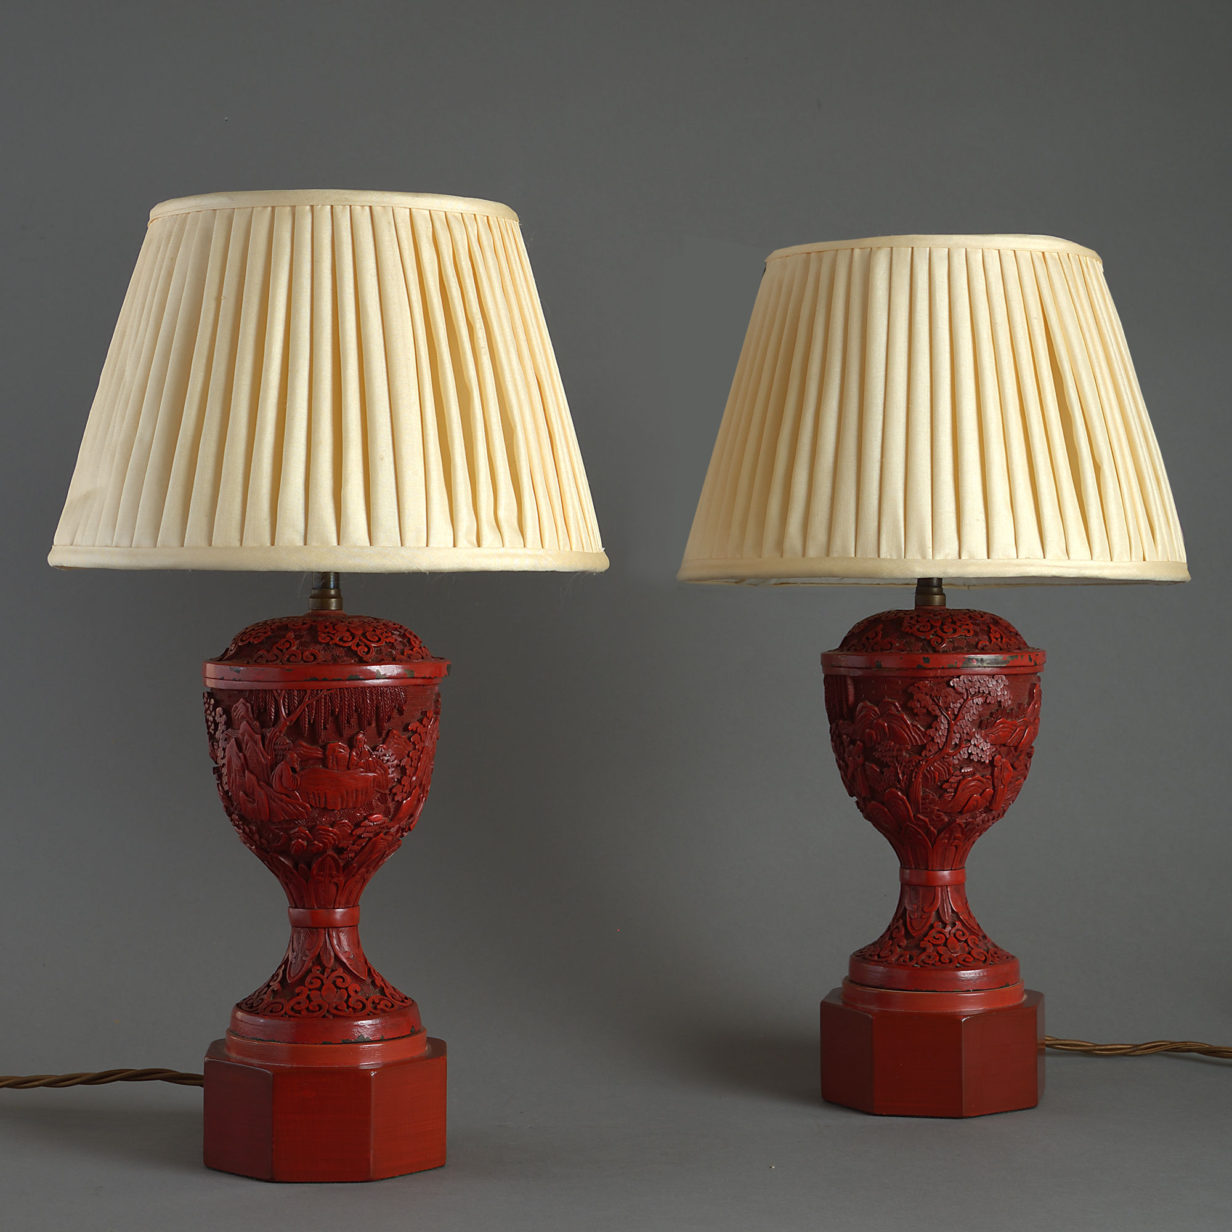 A pair of 19th century red cinnabar lacquer vase lamp bases